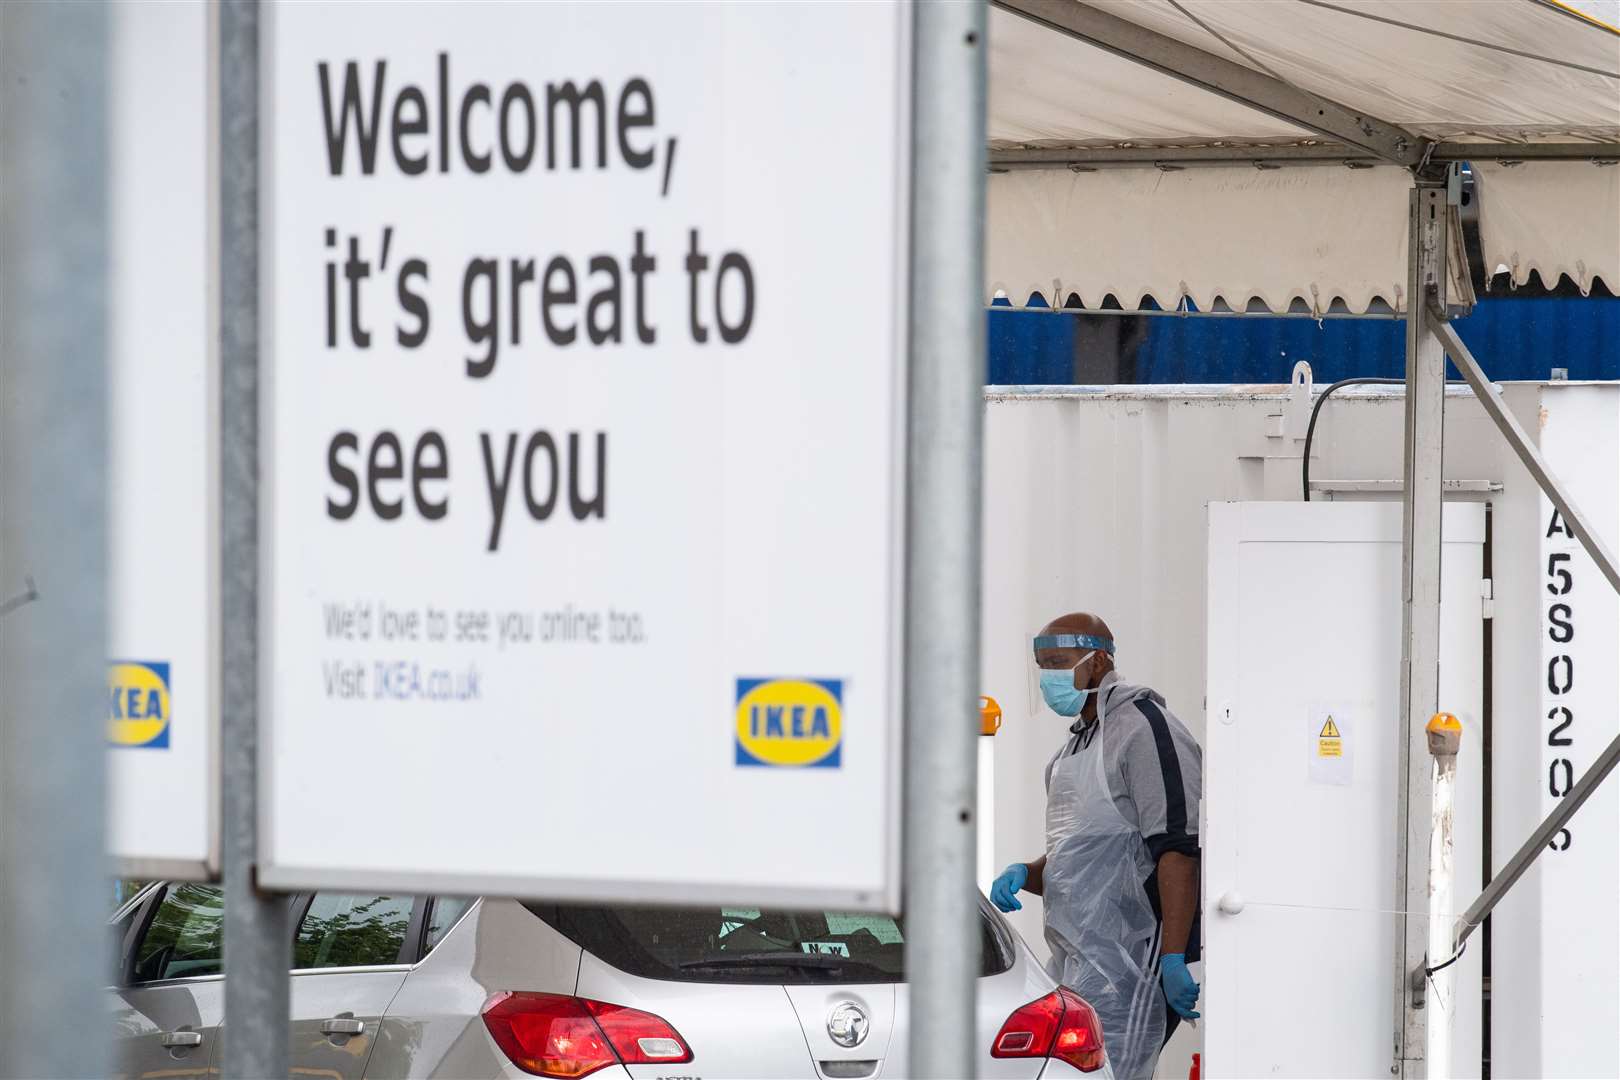 Ikea has handed over some car parks to be used as Covid-19 testing sites (Dominic Lipinski/PA)